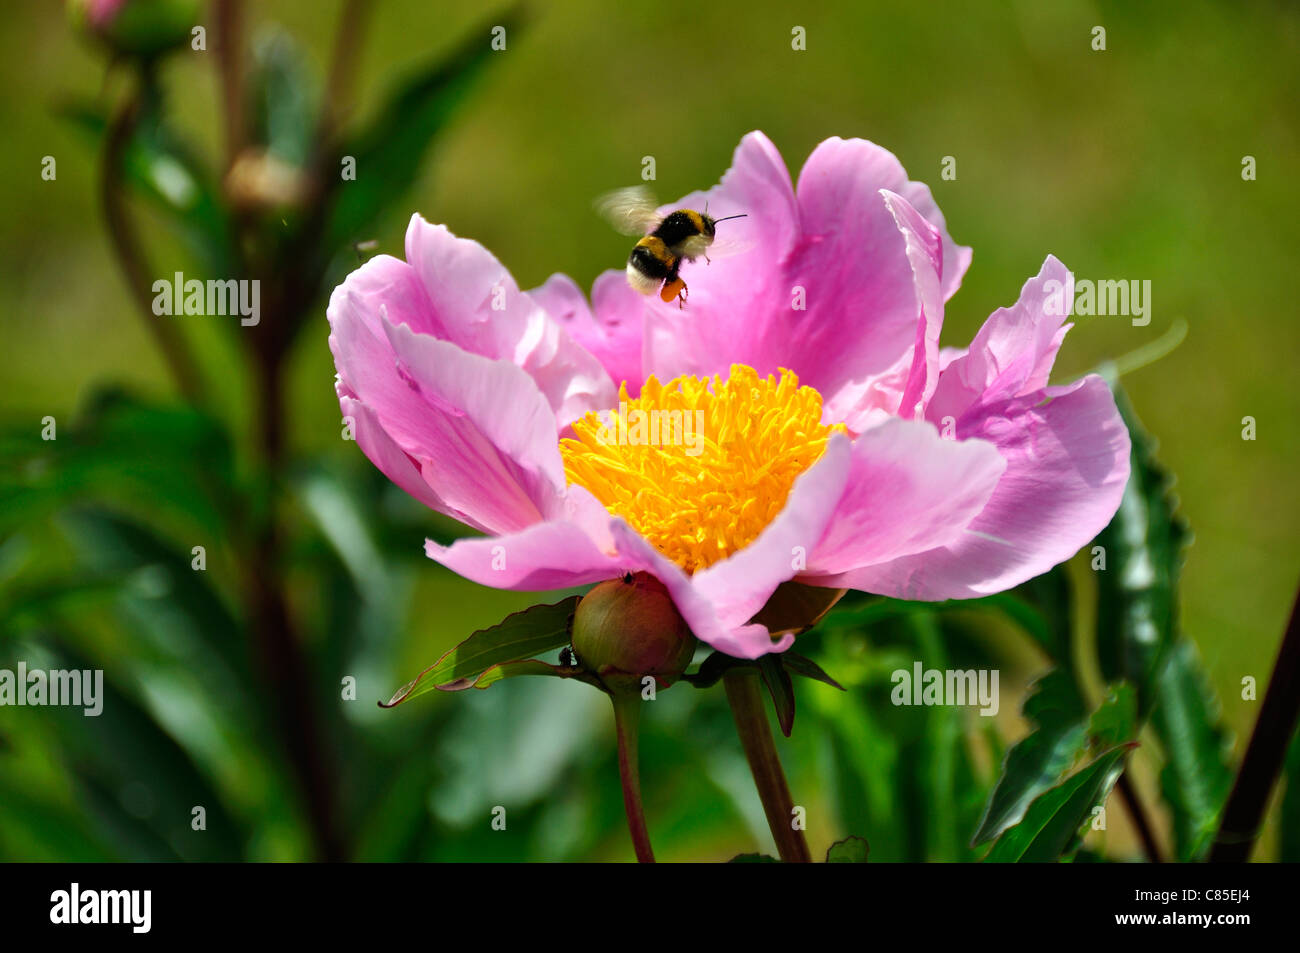 Peony (Paeonia officinalis) in bloom with a bee flies over. Stock Photo